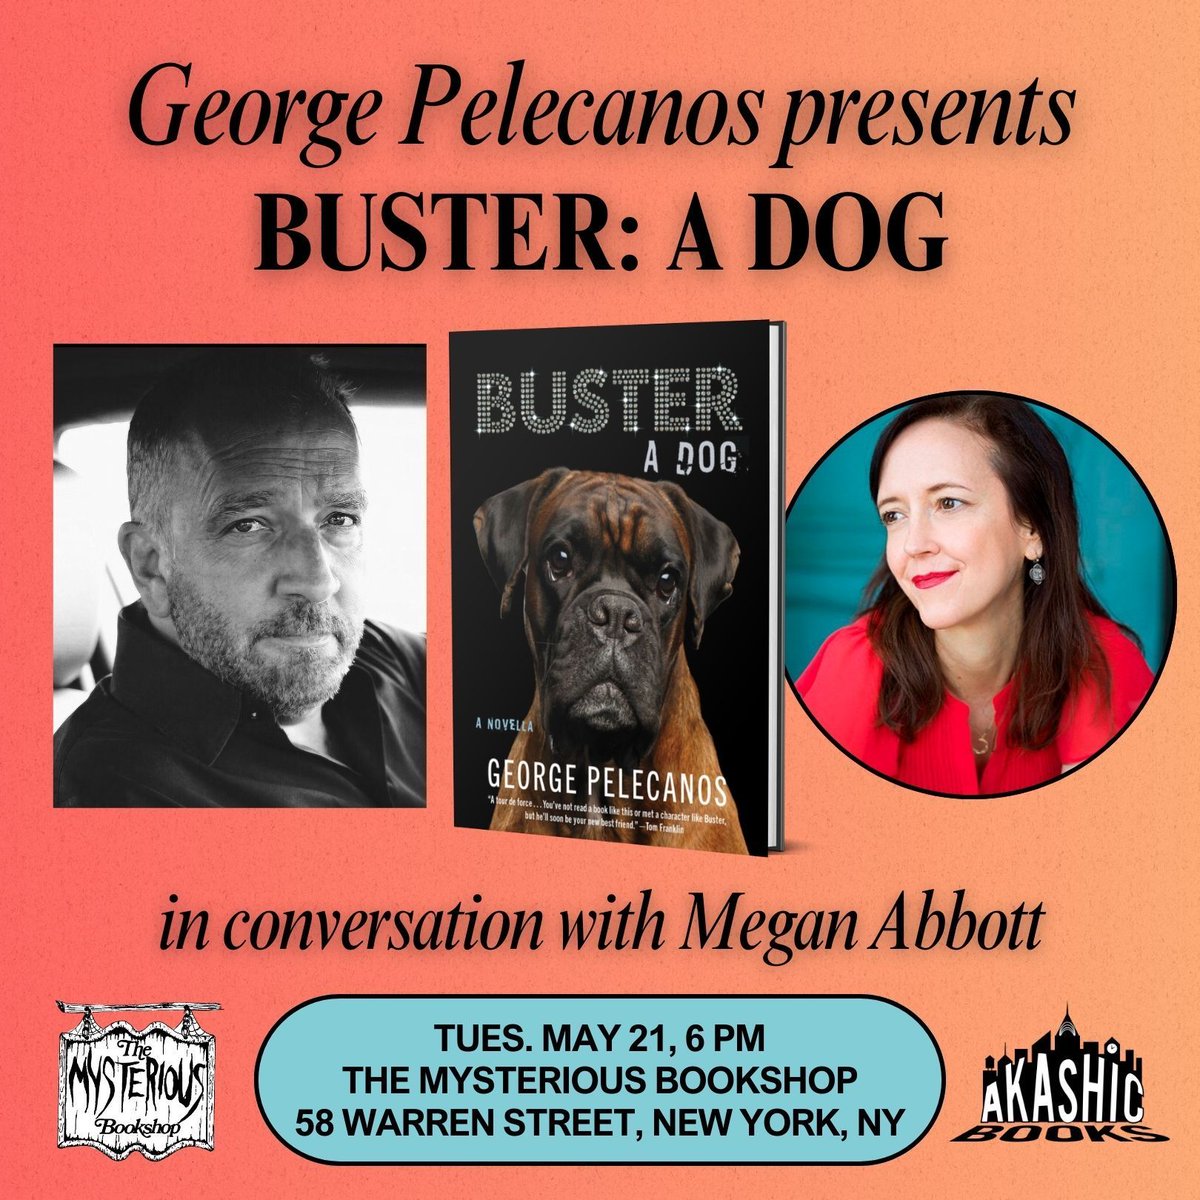 MAY 21 — @pelecanos1 will be presenting his new book, Buster: A Dog, in conversation with @meganeabbott at @TheMysterious in New York, NY! 

#dogbooks #newrelease #indiepublishing #bookevent #nycevents #booknews #indiebookstore